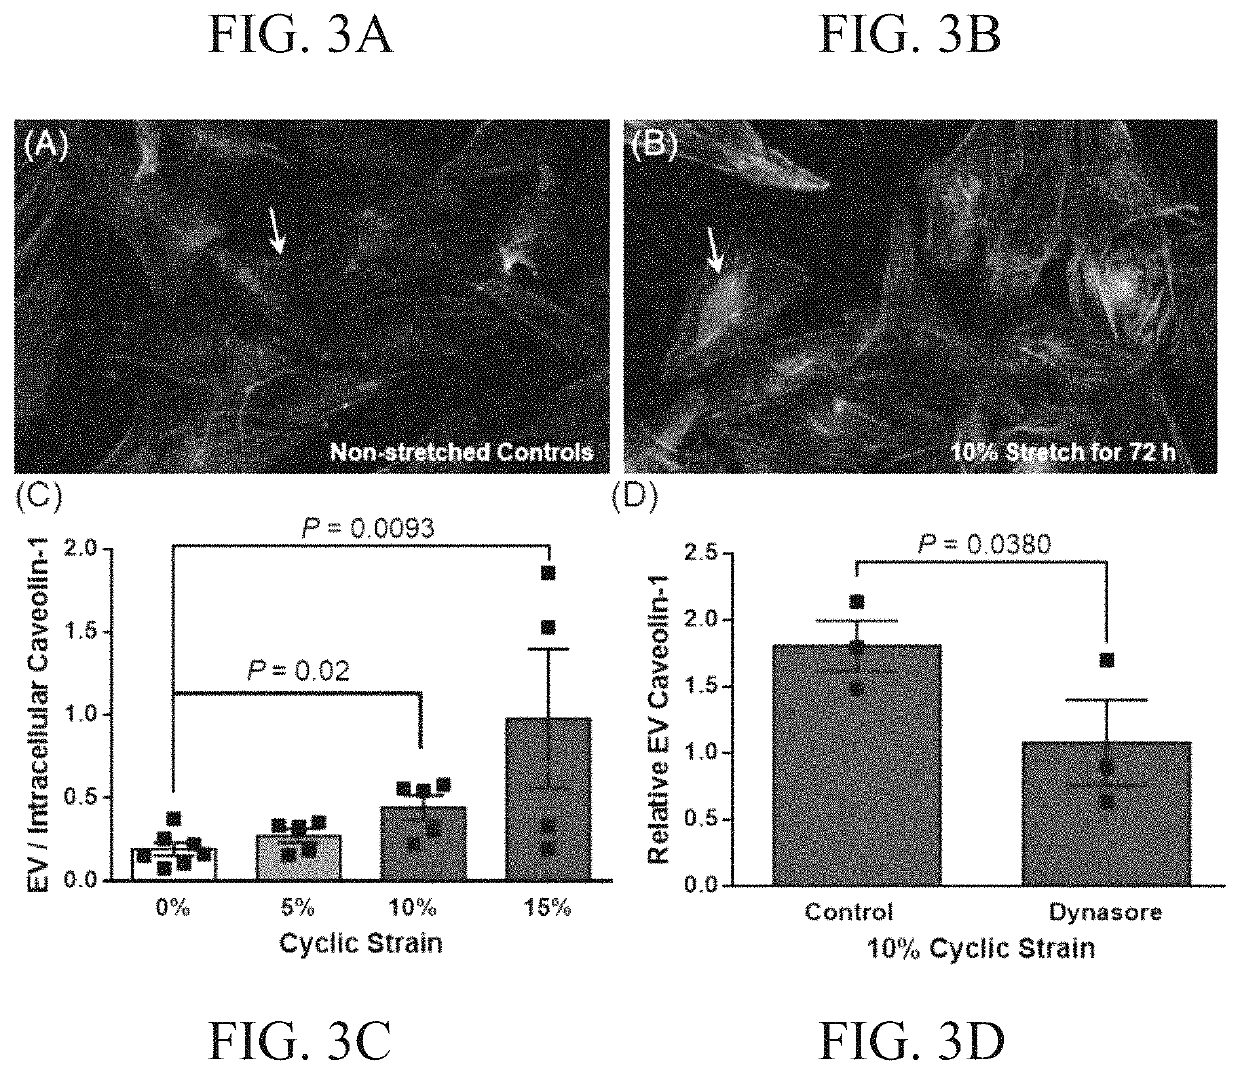 Materials and methods for the treatment of vascular calcification